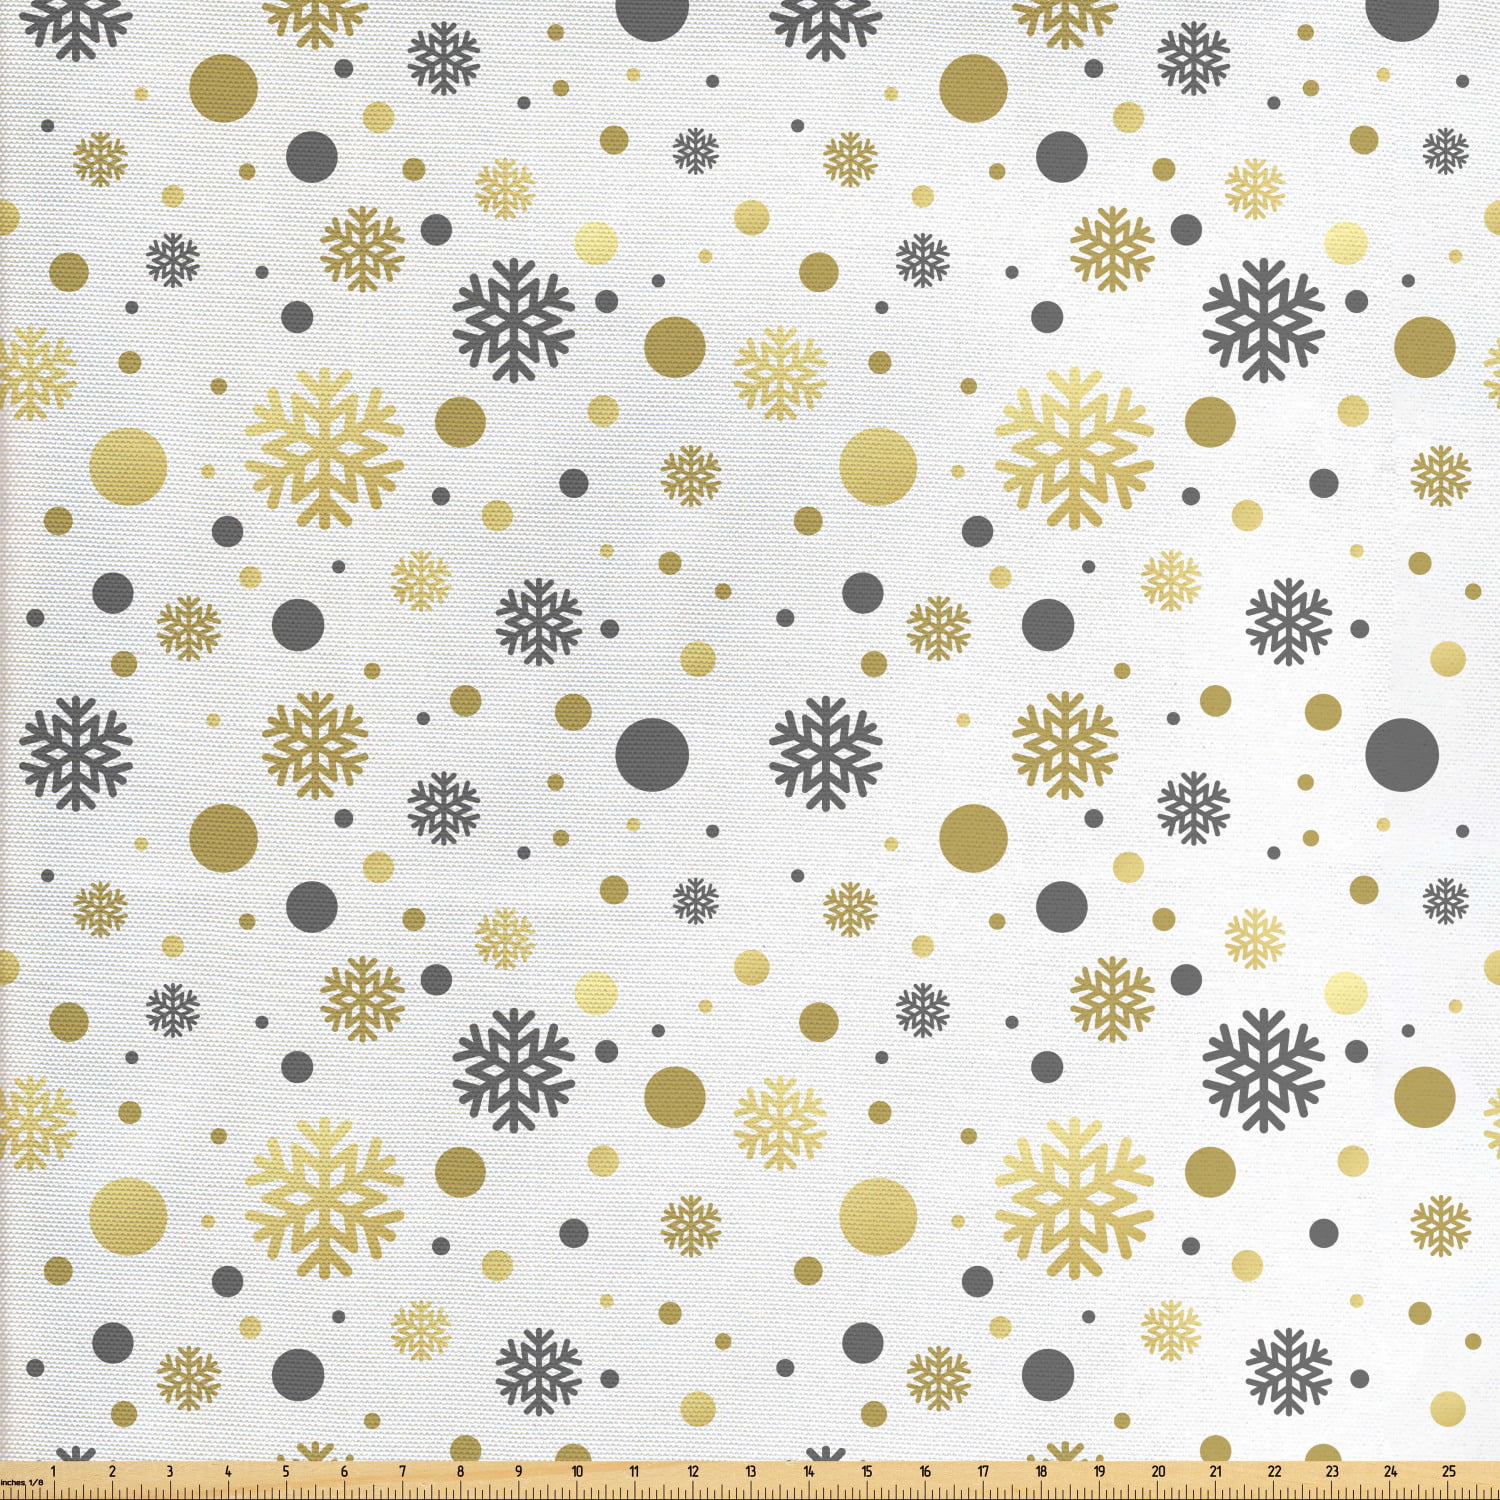  Ambesonne Christmas Fabric by The Yard, Pine Fir Cones Balls  and Coniferous Tree Leaves Holly Berry Old Fashioned, Decorative Fabric for  Upholstery and Home Accents, 5 Yards, Grey Green